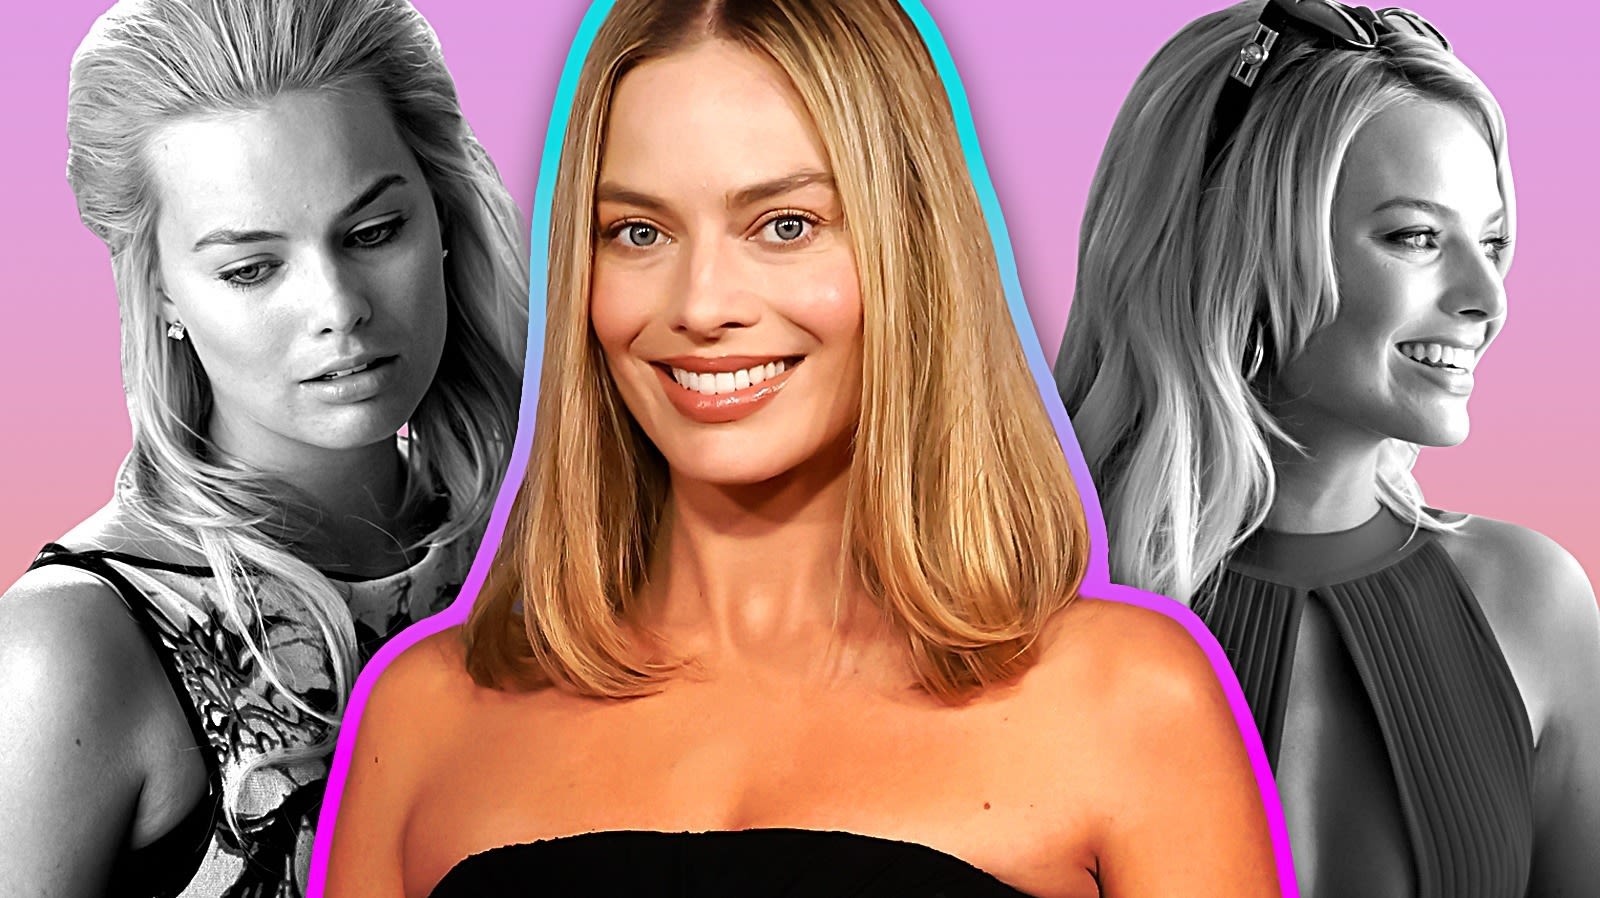 Margot Robbie Was Never The Same After The Wolf Of Wall Street - Looper